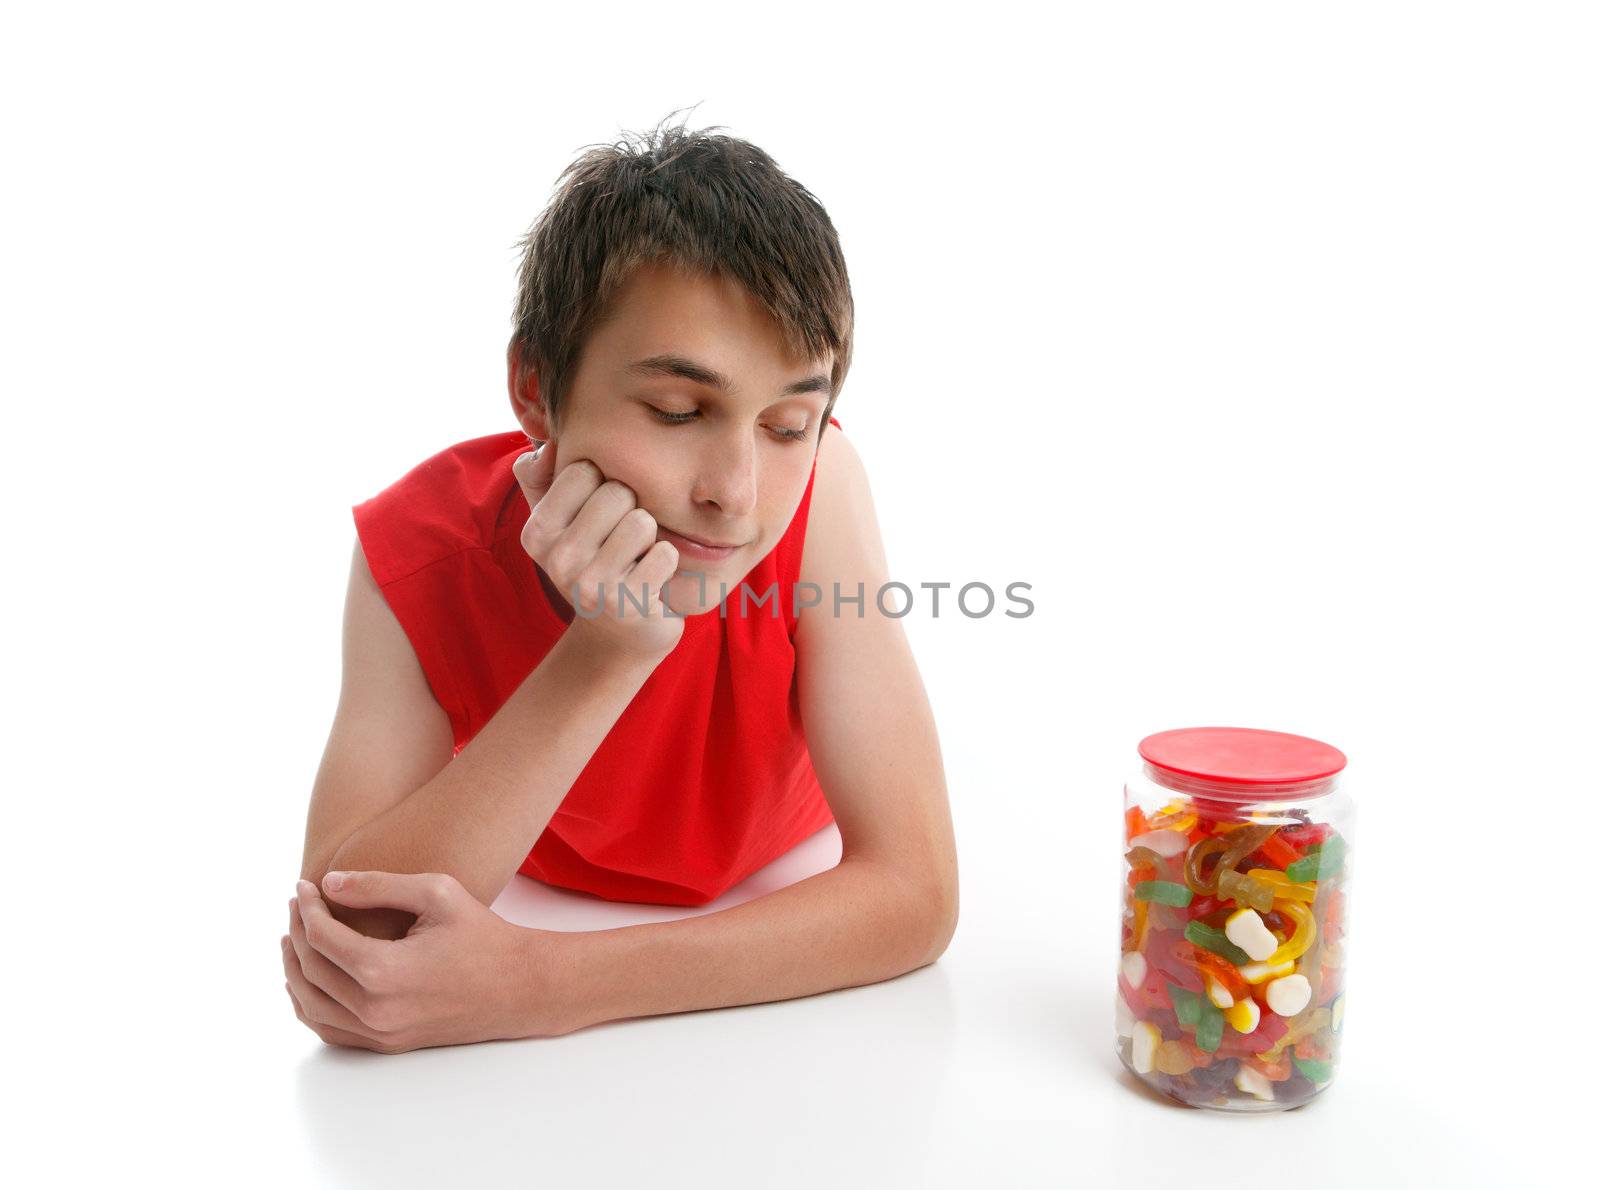 A boy ponders whether to open a jar of assorted confectionery.  White background.